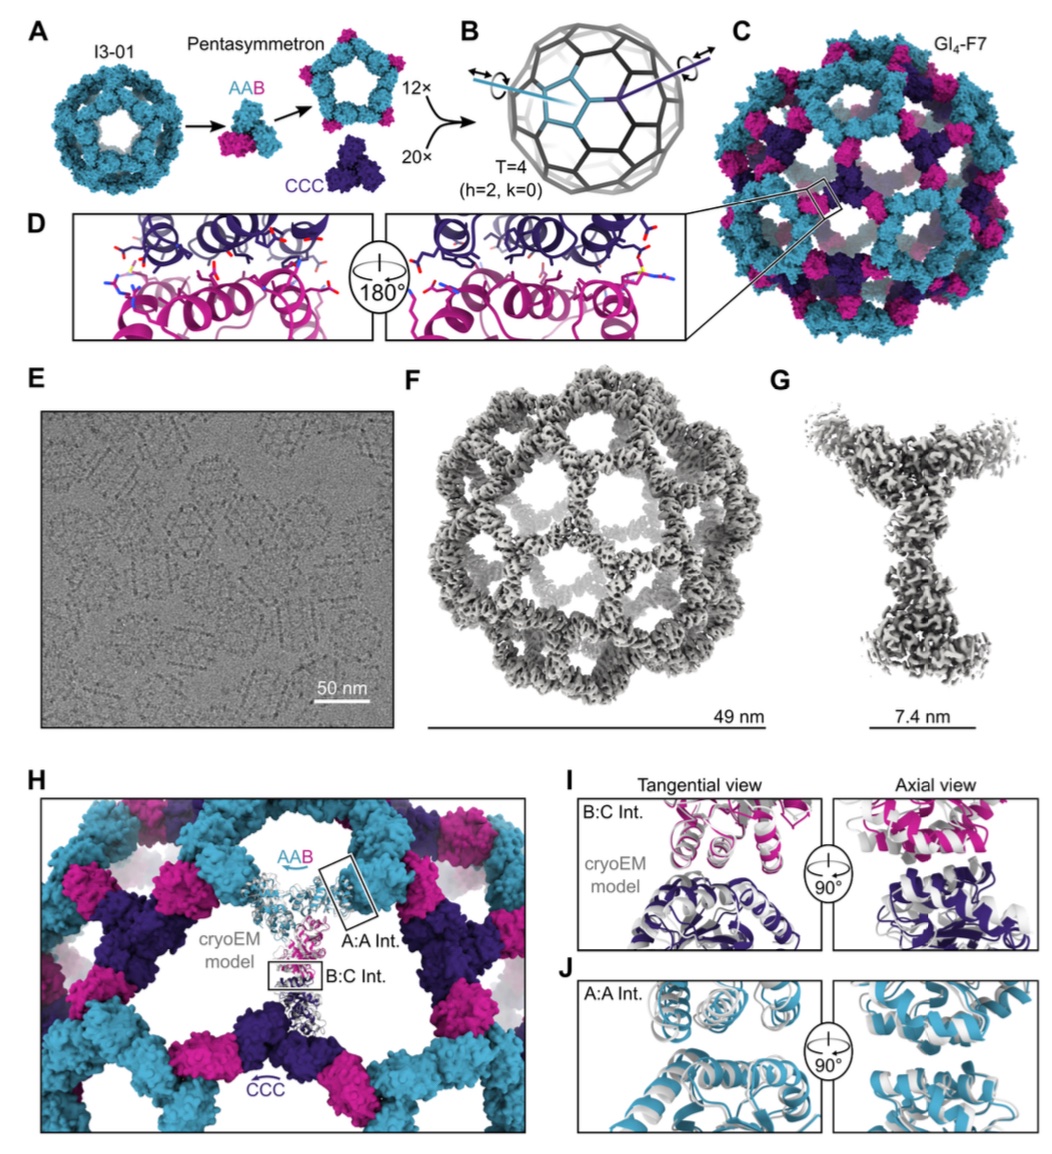 “Hierarchical design of pseudosymmetric protein nanoparticles”

Designed particles almost 0.1 microns across w/ up to 960 (!) subunits

biorxiv.org/content/10.110…